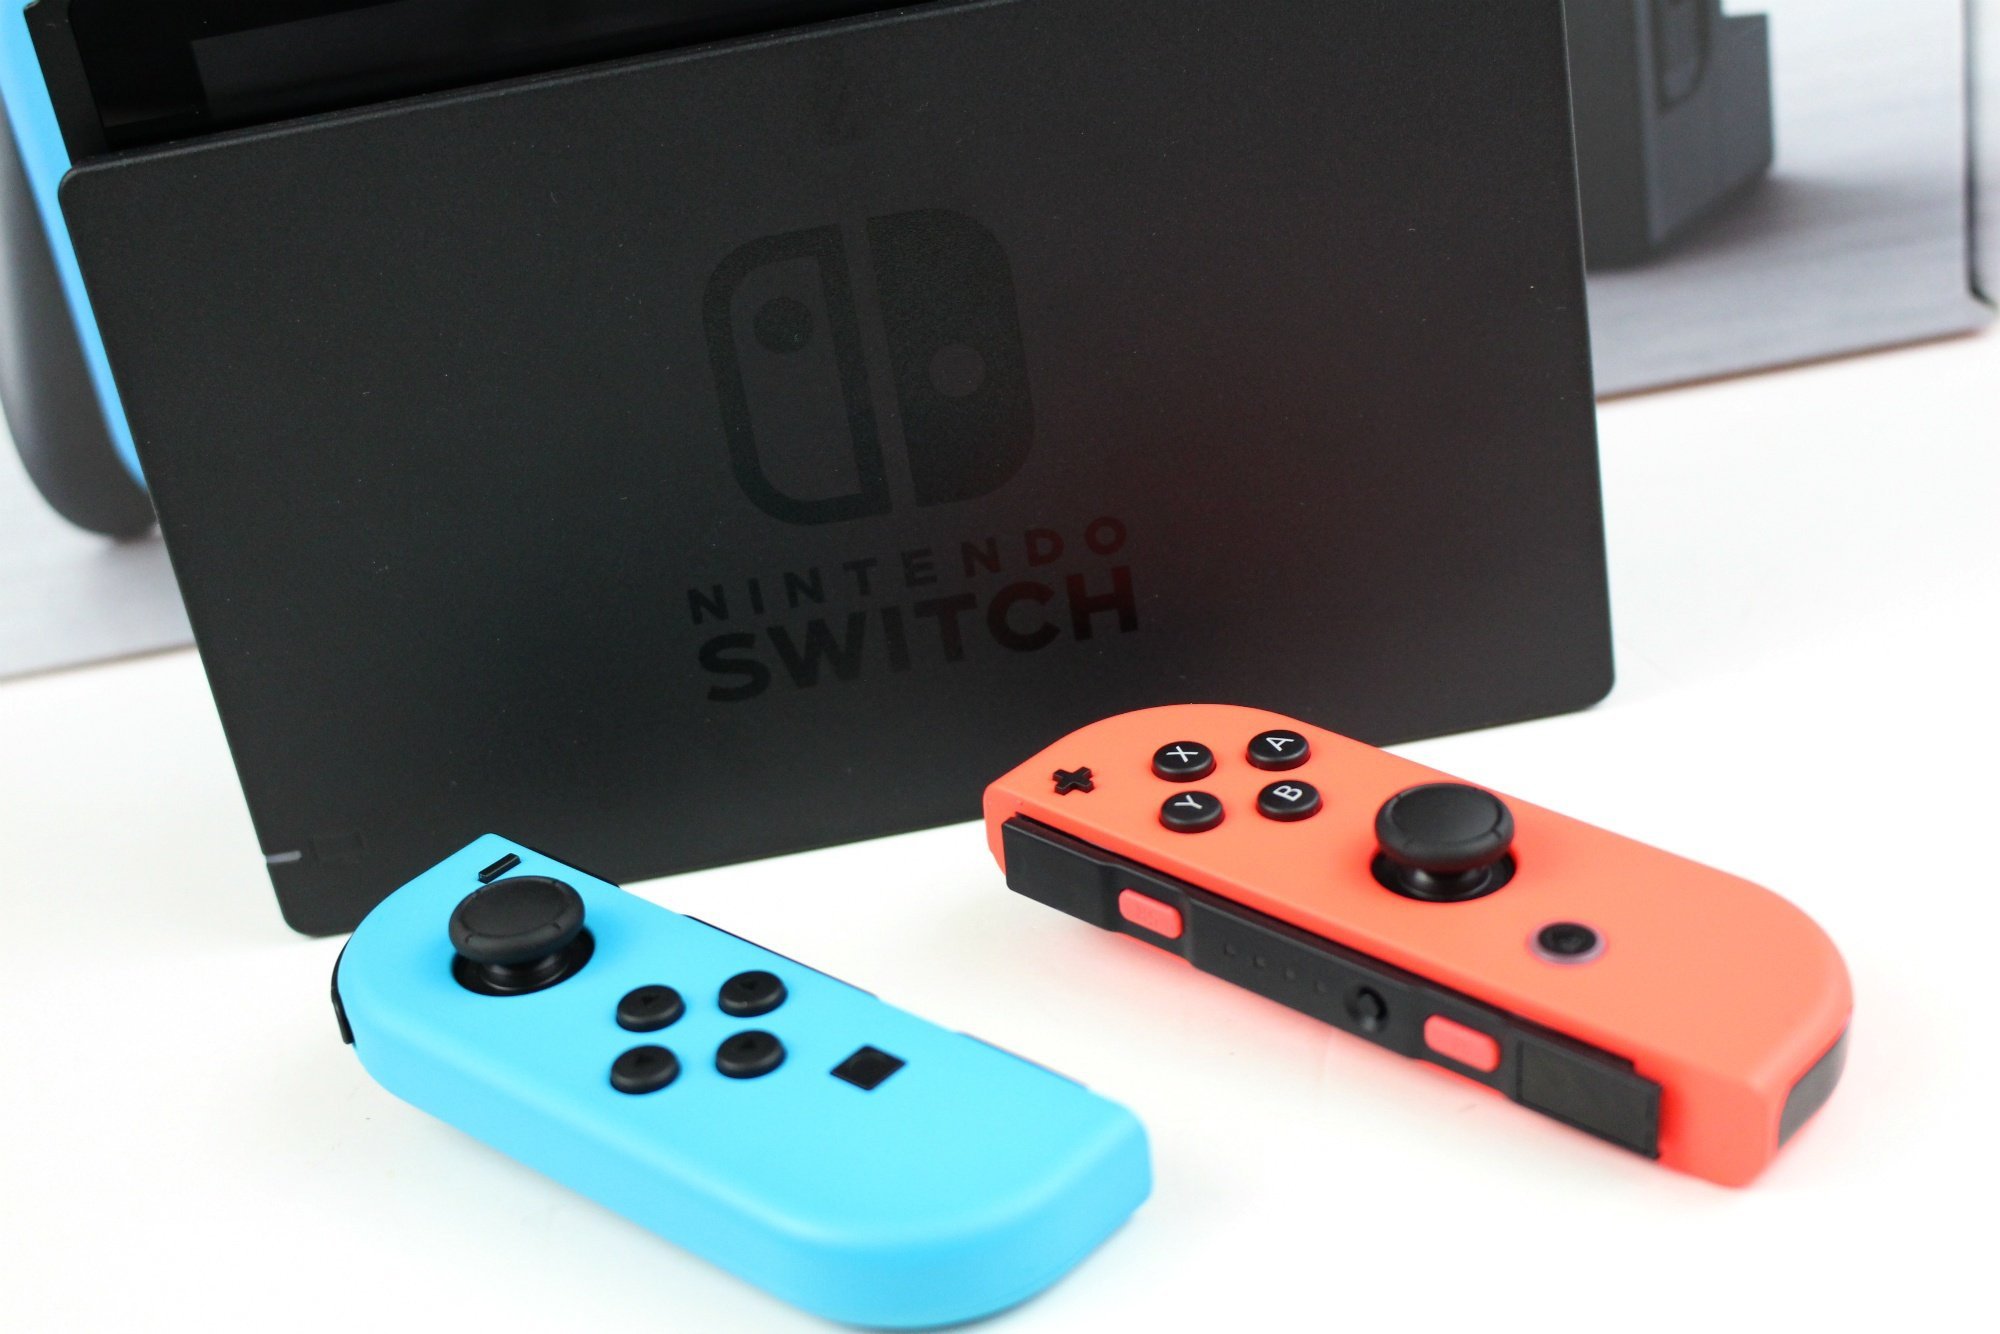 As Nintendo Switch Looks to Rapidly Overtake Wii U Sales, 3DS